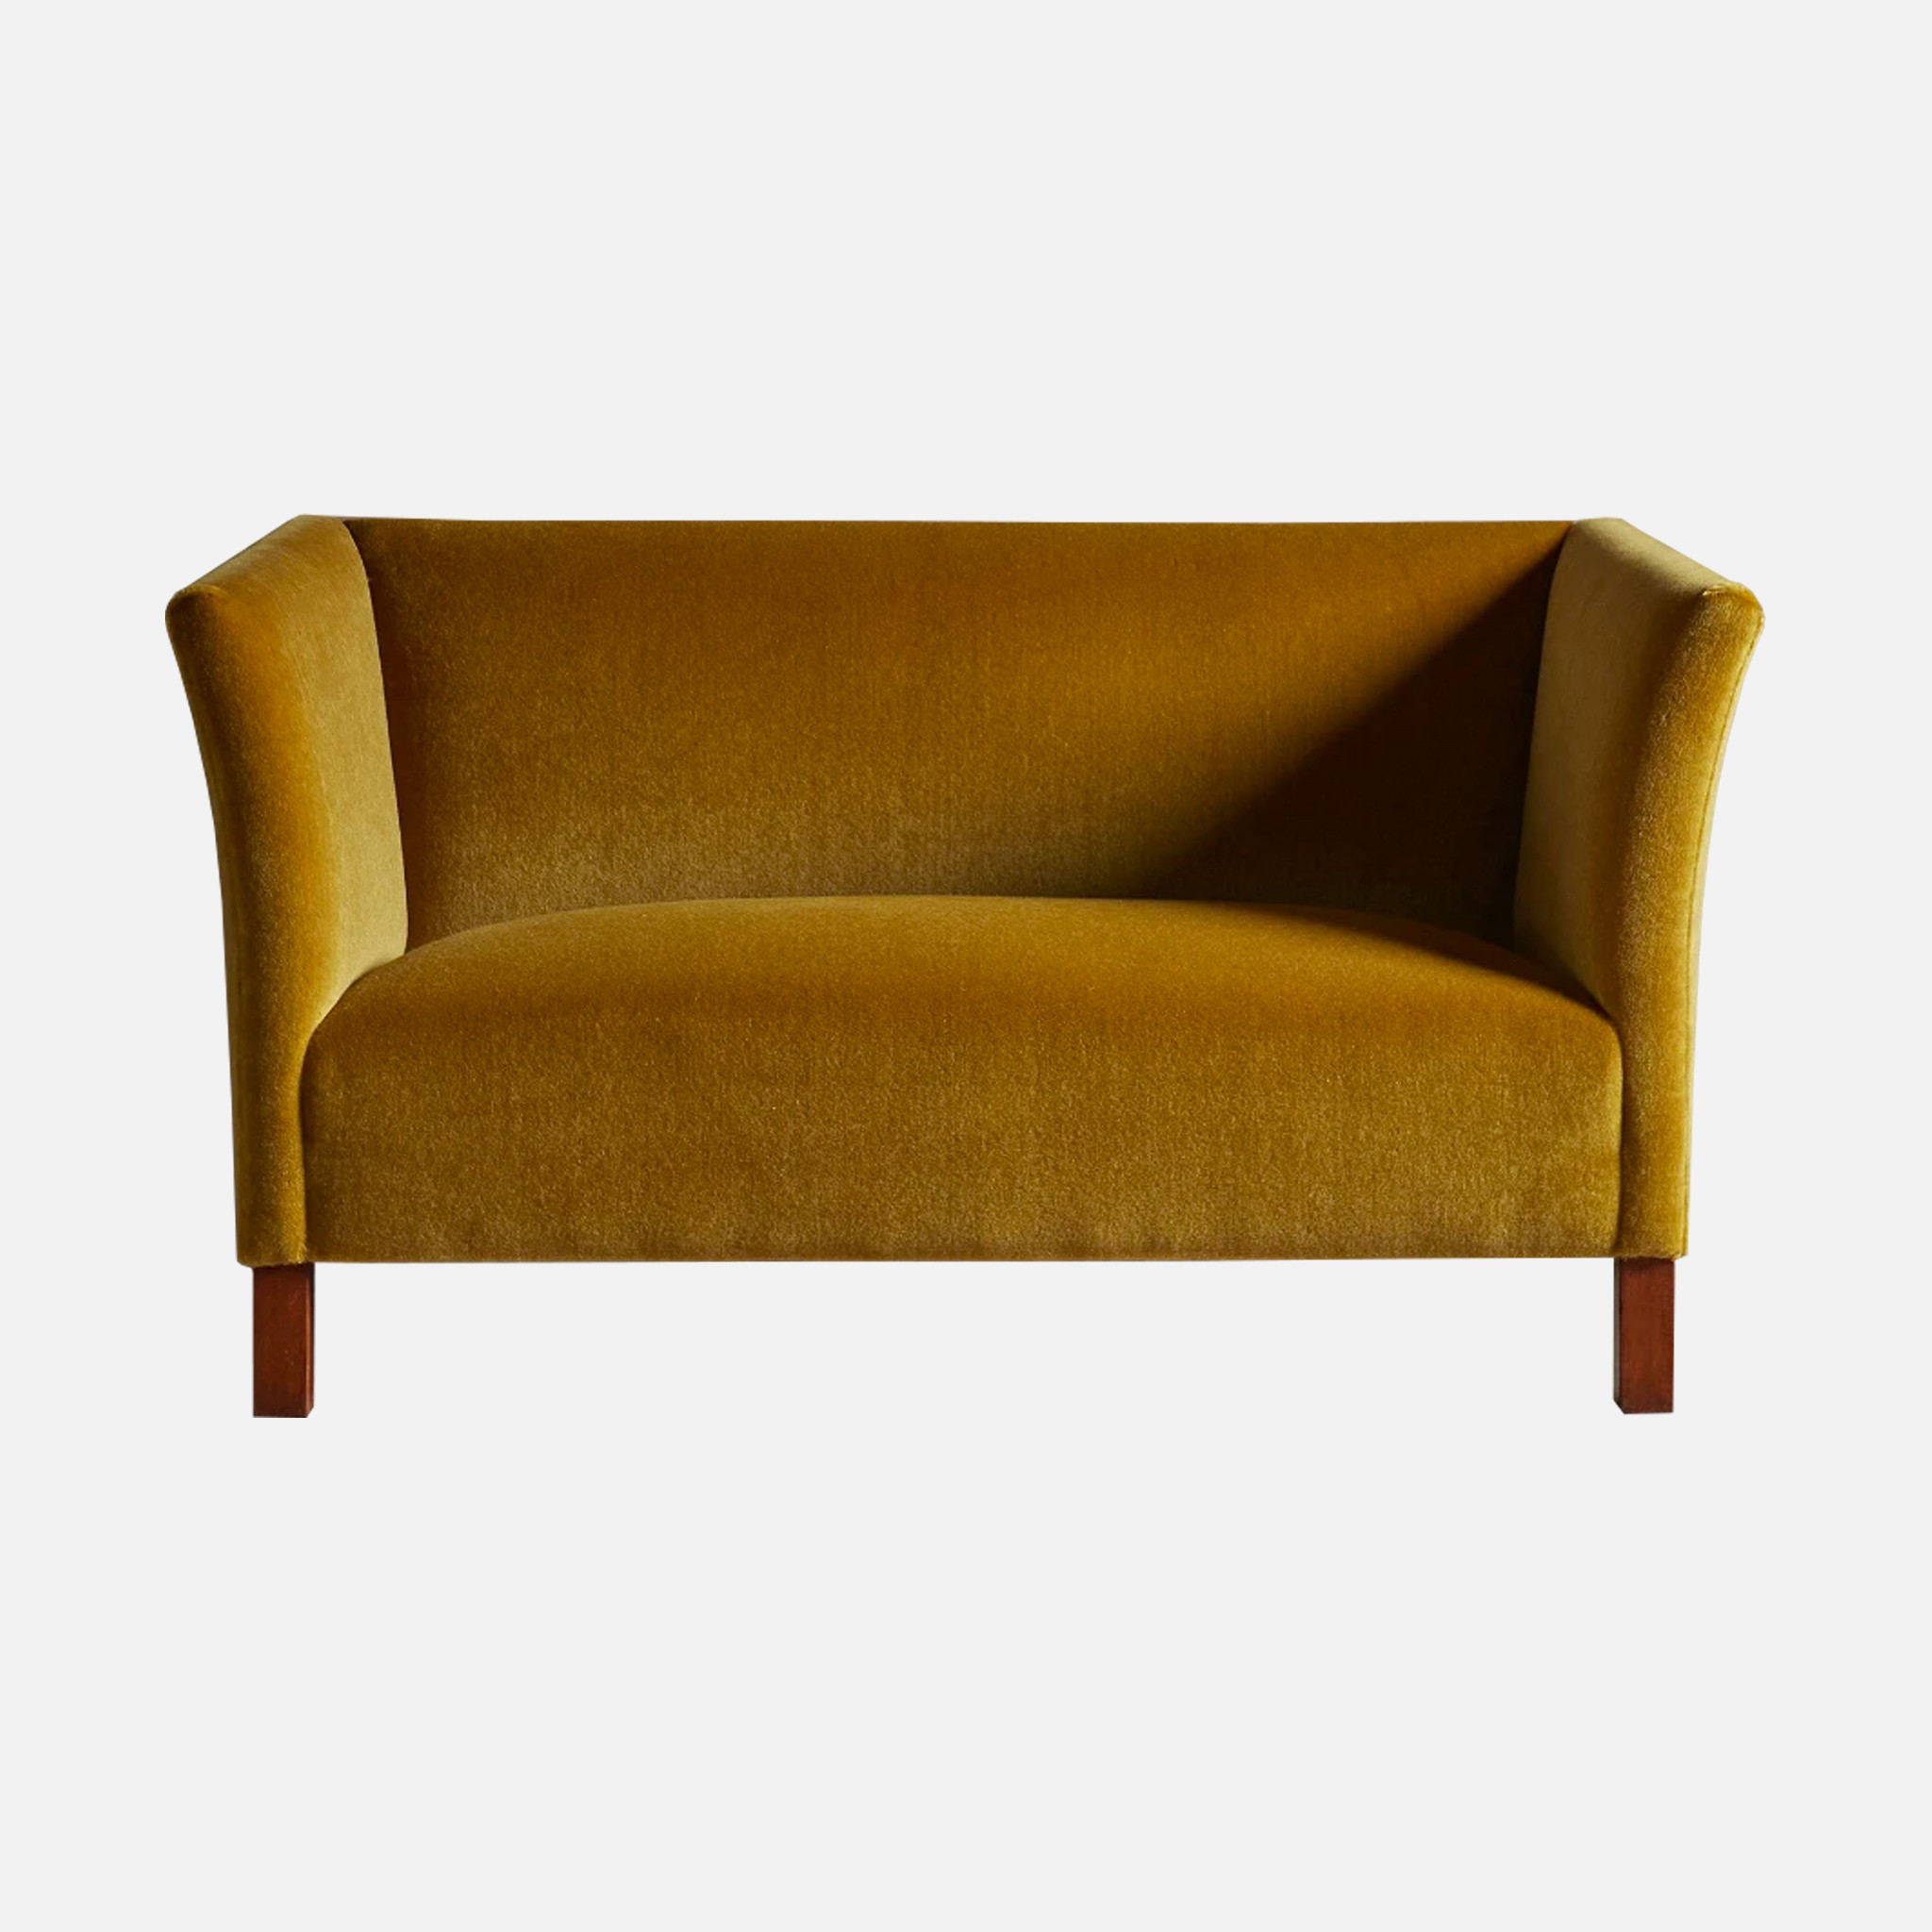 The image of an The Expert Vintage Midcentury Modern Settee product